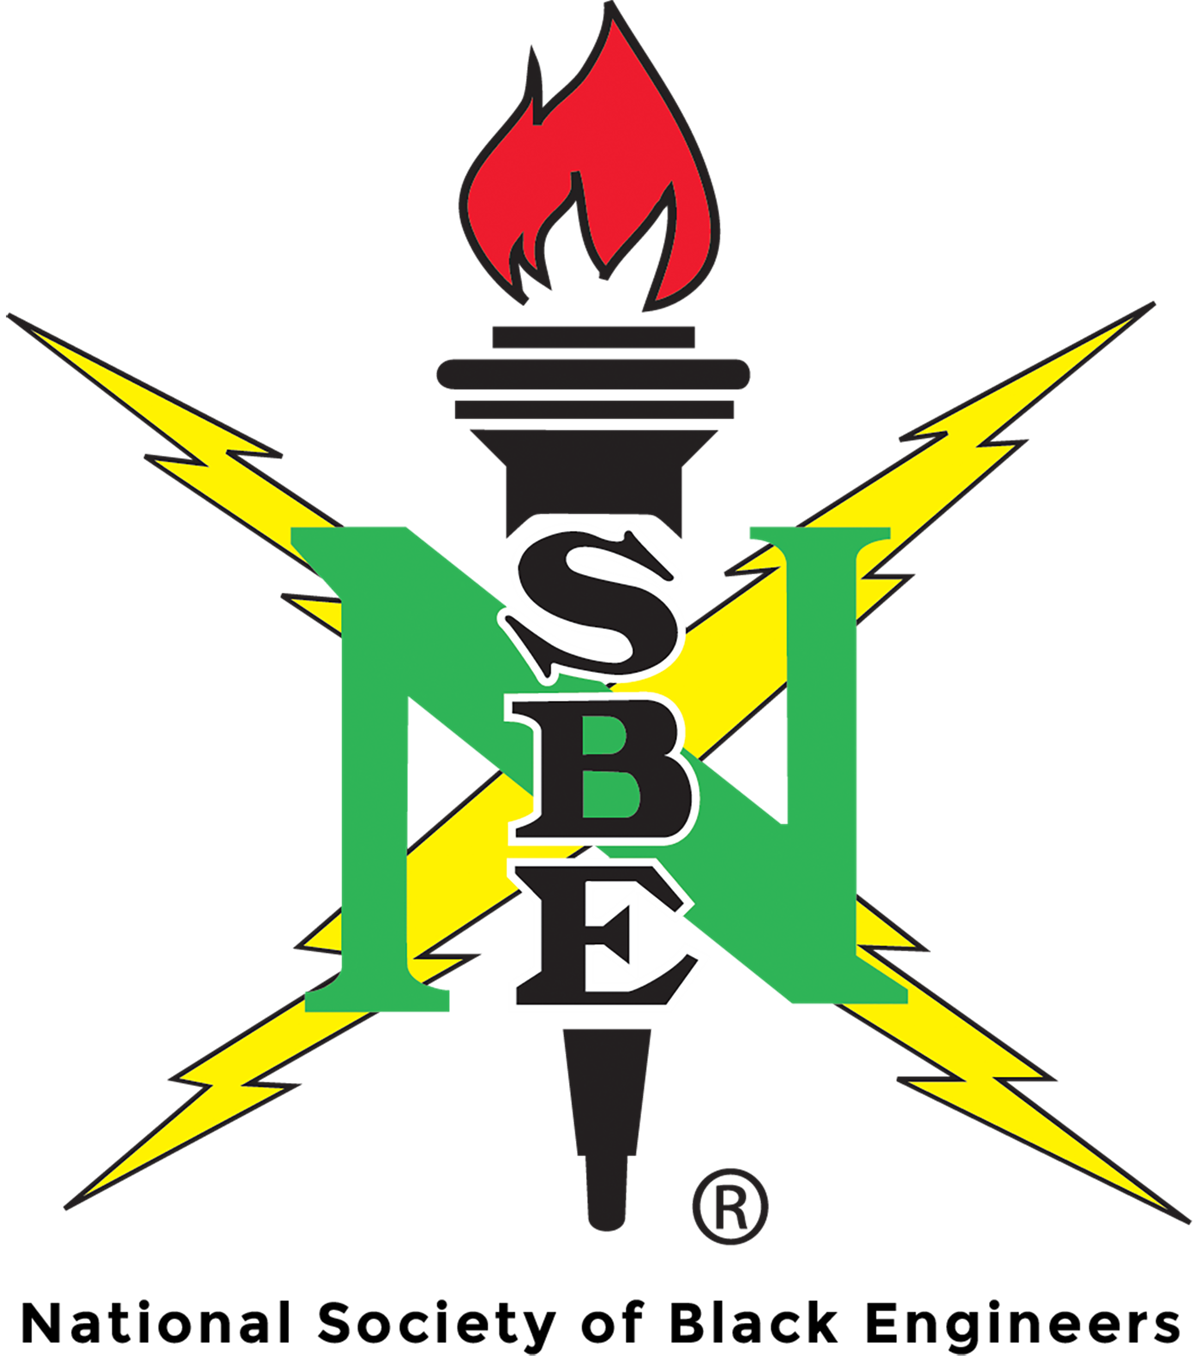 National Society of Black Engineers (NSBE):The National Society of Black Engineers (NSBE) with more than 30,000 members, is one of the largest student-managed organization in the country. NSBE is comprised of more than 233 chapters on college and university campuses, 65 Alumni Extension chapters nationwide and 89 Pre-College chapters. These chapters are geographically divided into six regions.